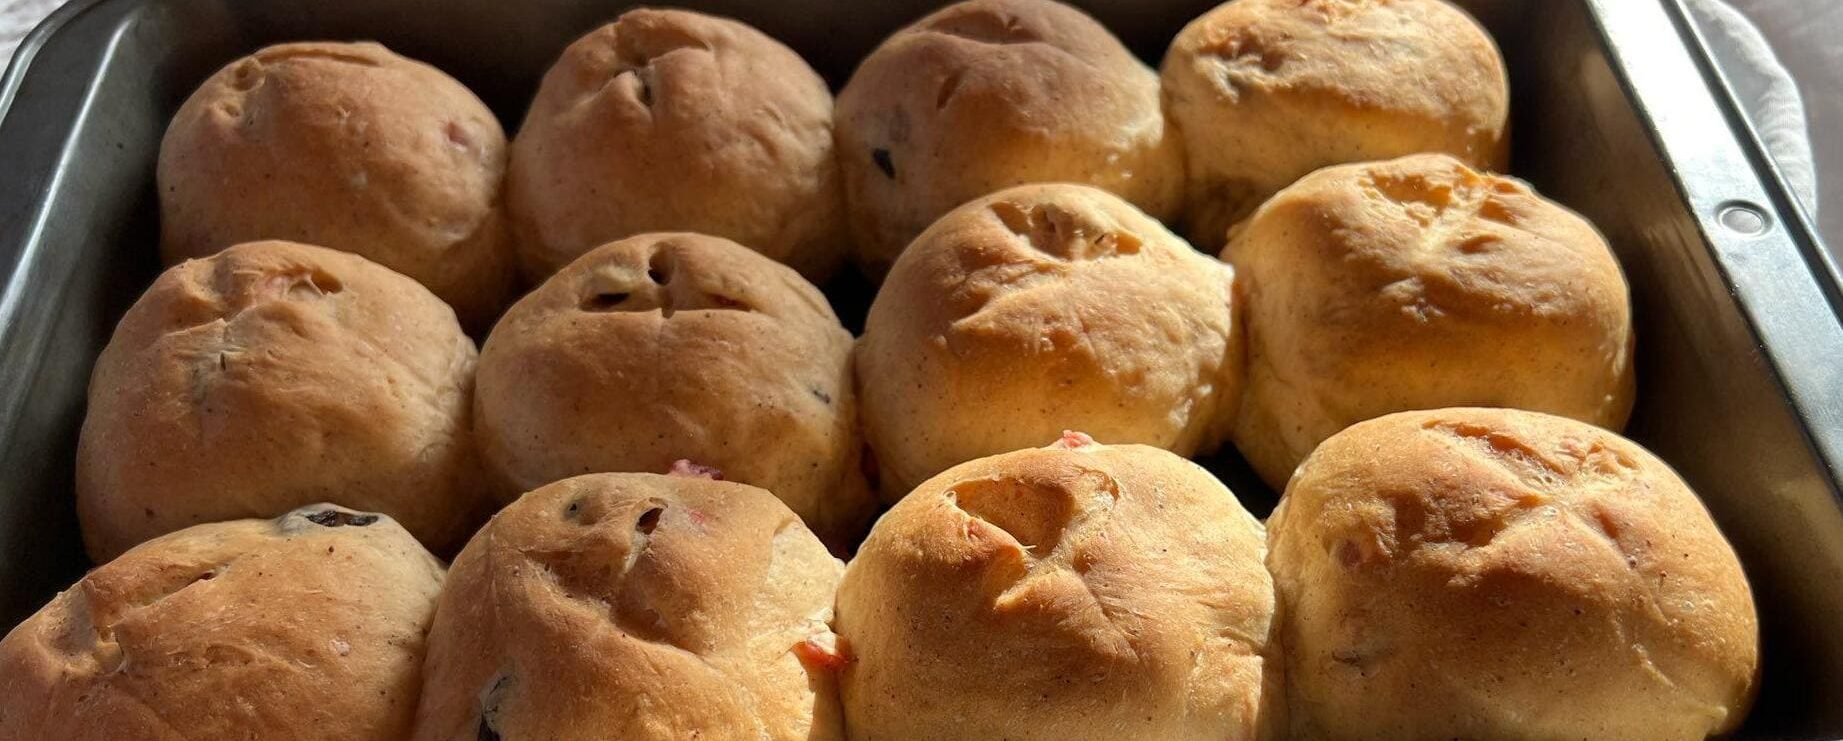 Fresh buns ready to be crossed